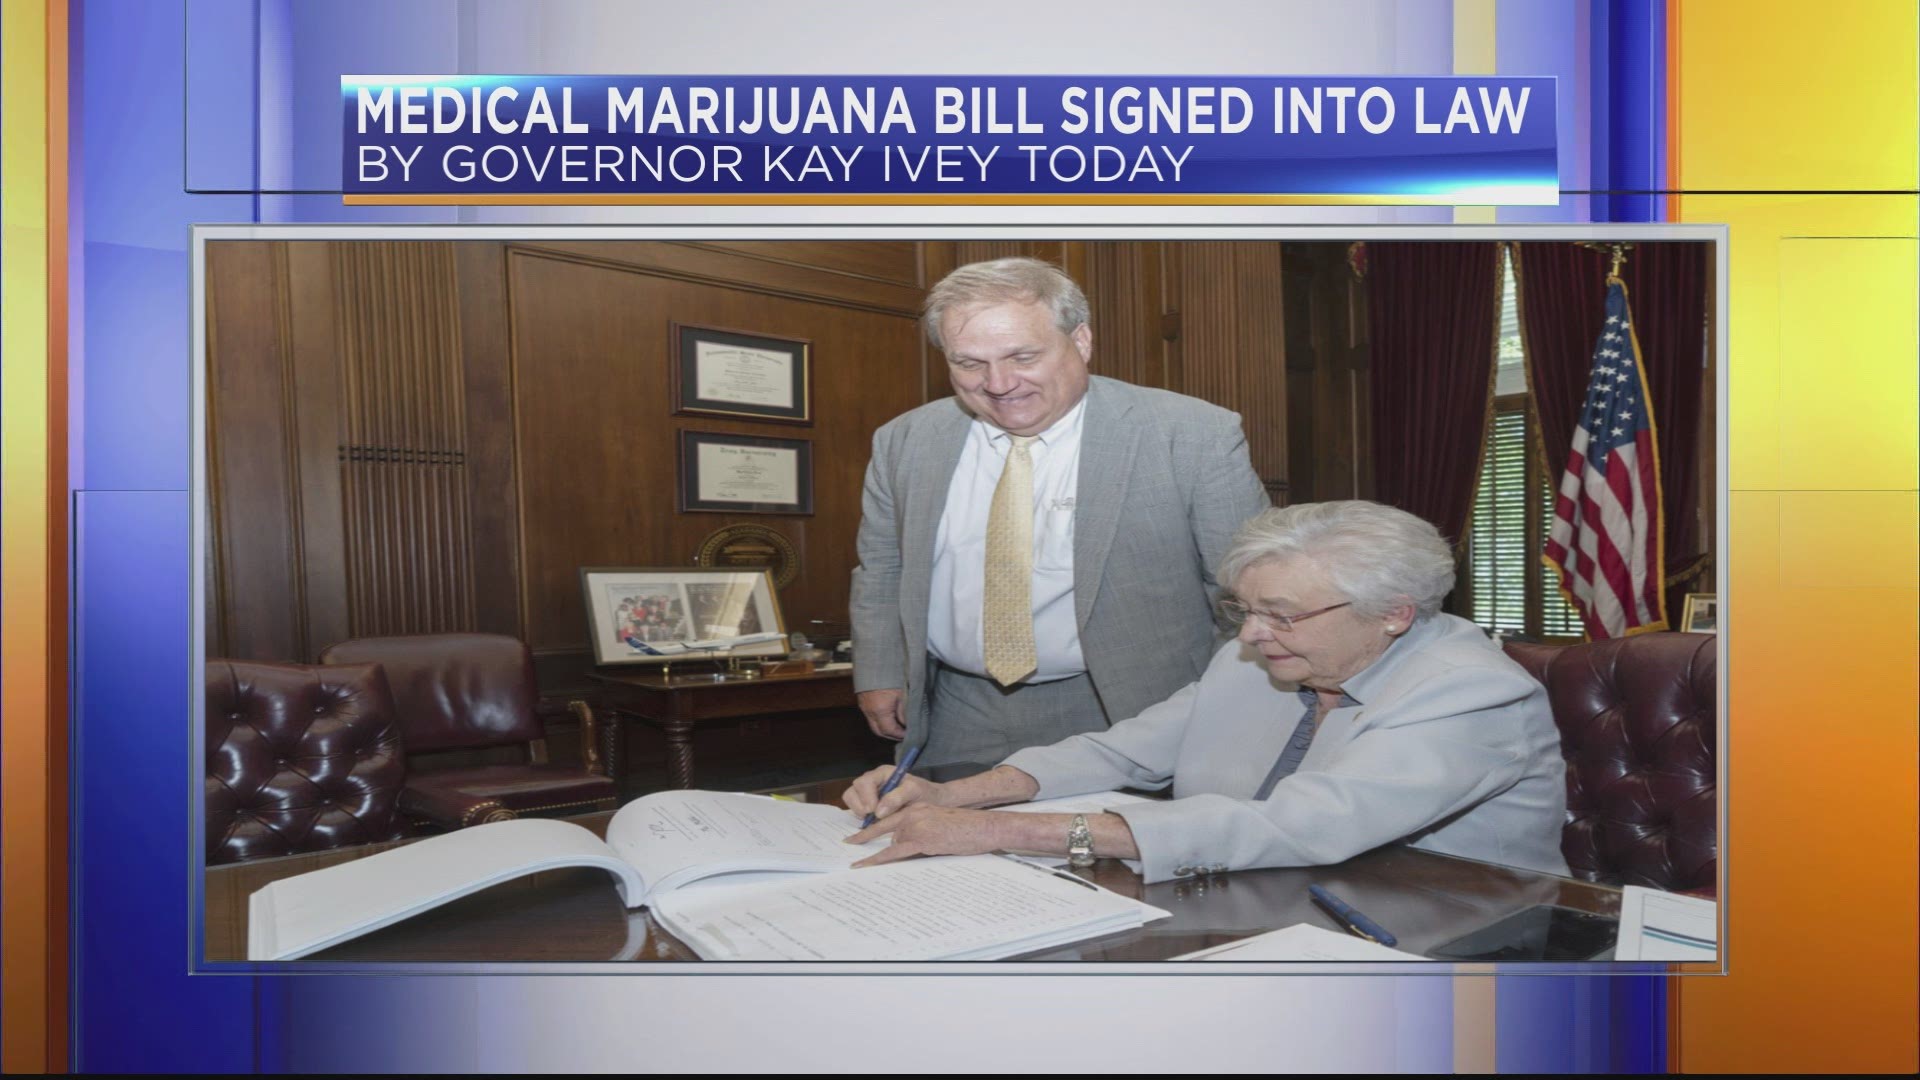 Gov. Kay Ivey on Monday signed into law a bill allowing for medical marijuana statewide.